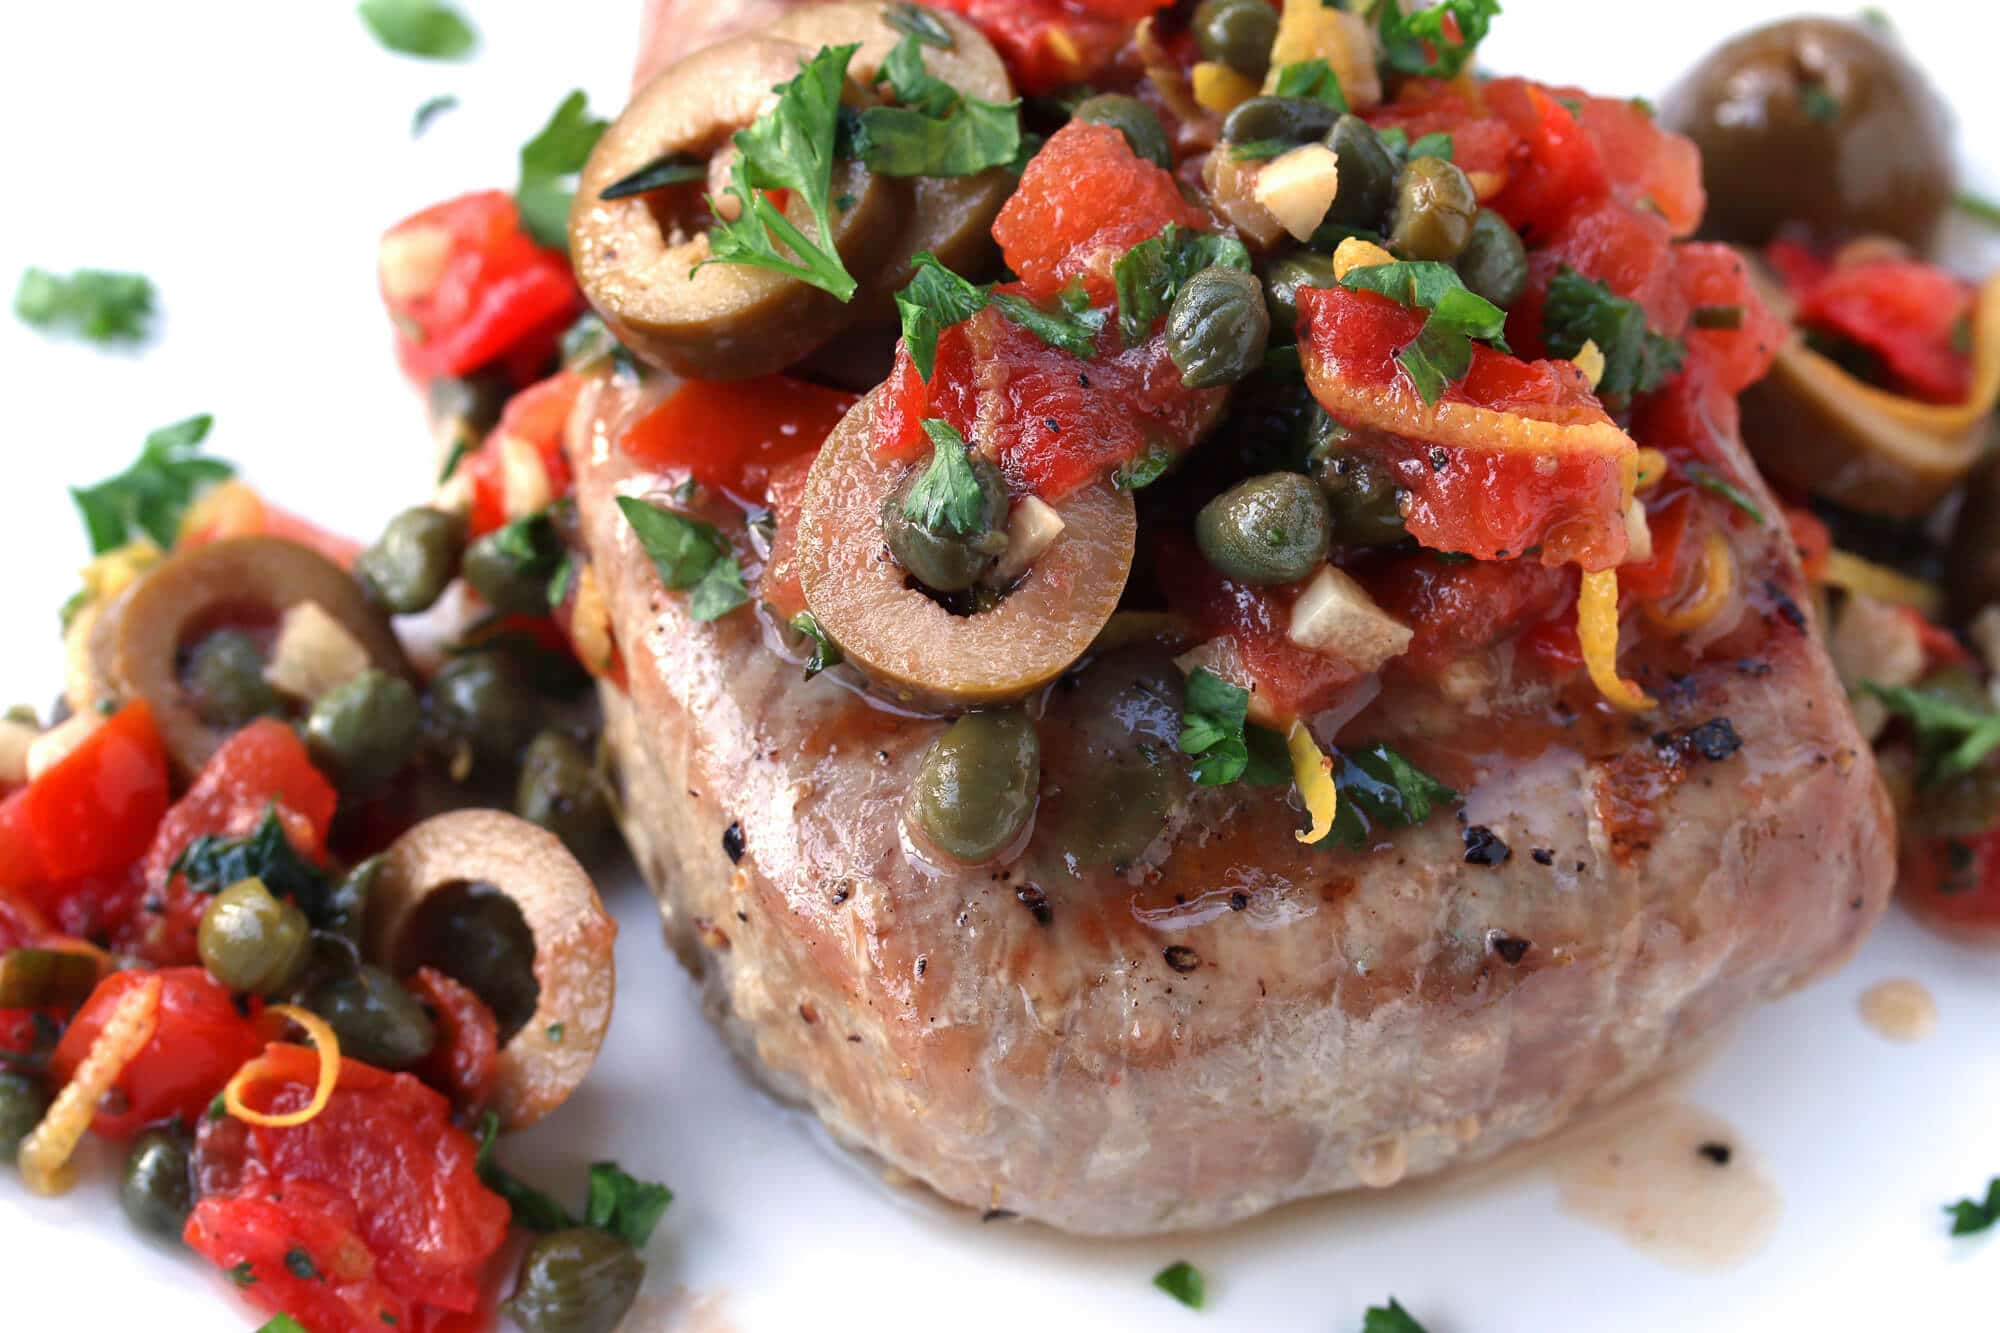 grilled tuna steaks recipe Sicilian style olives capers tomatoes lemon wine sauce fish seafood